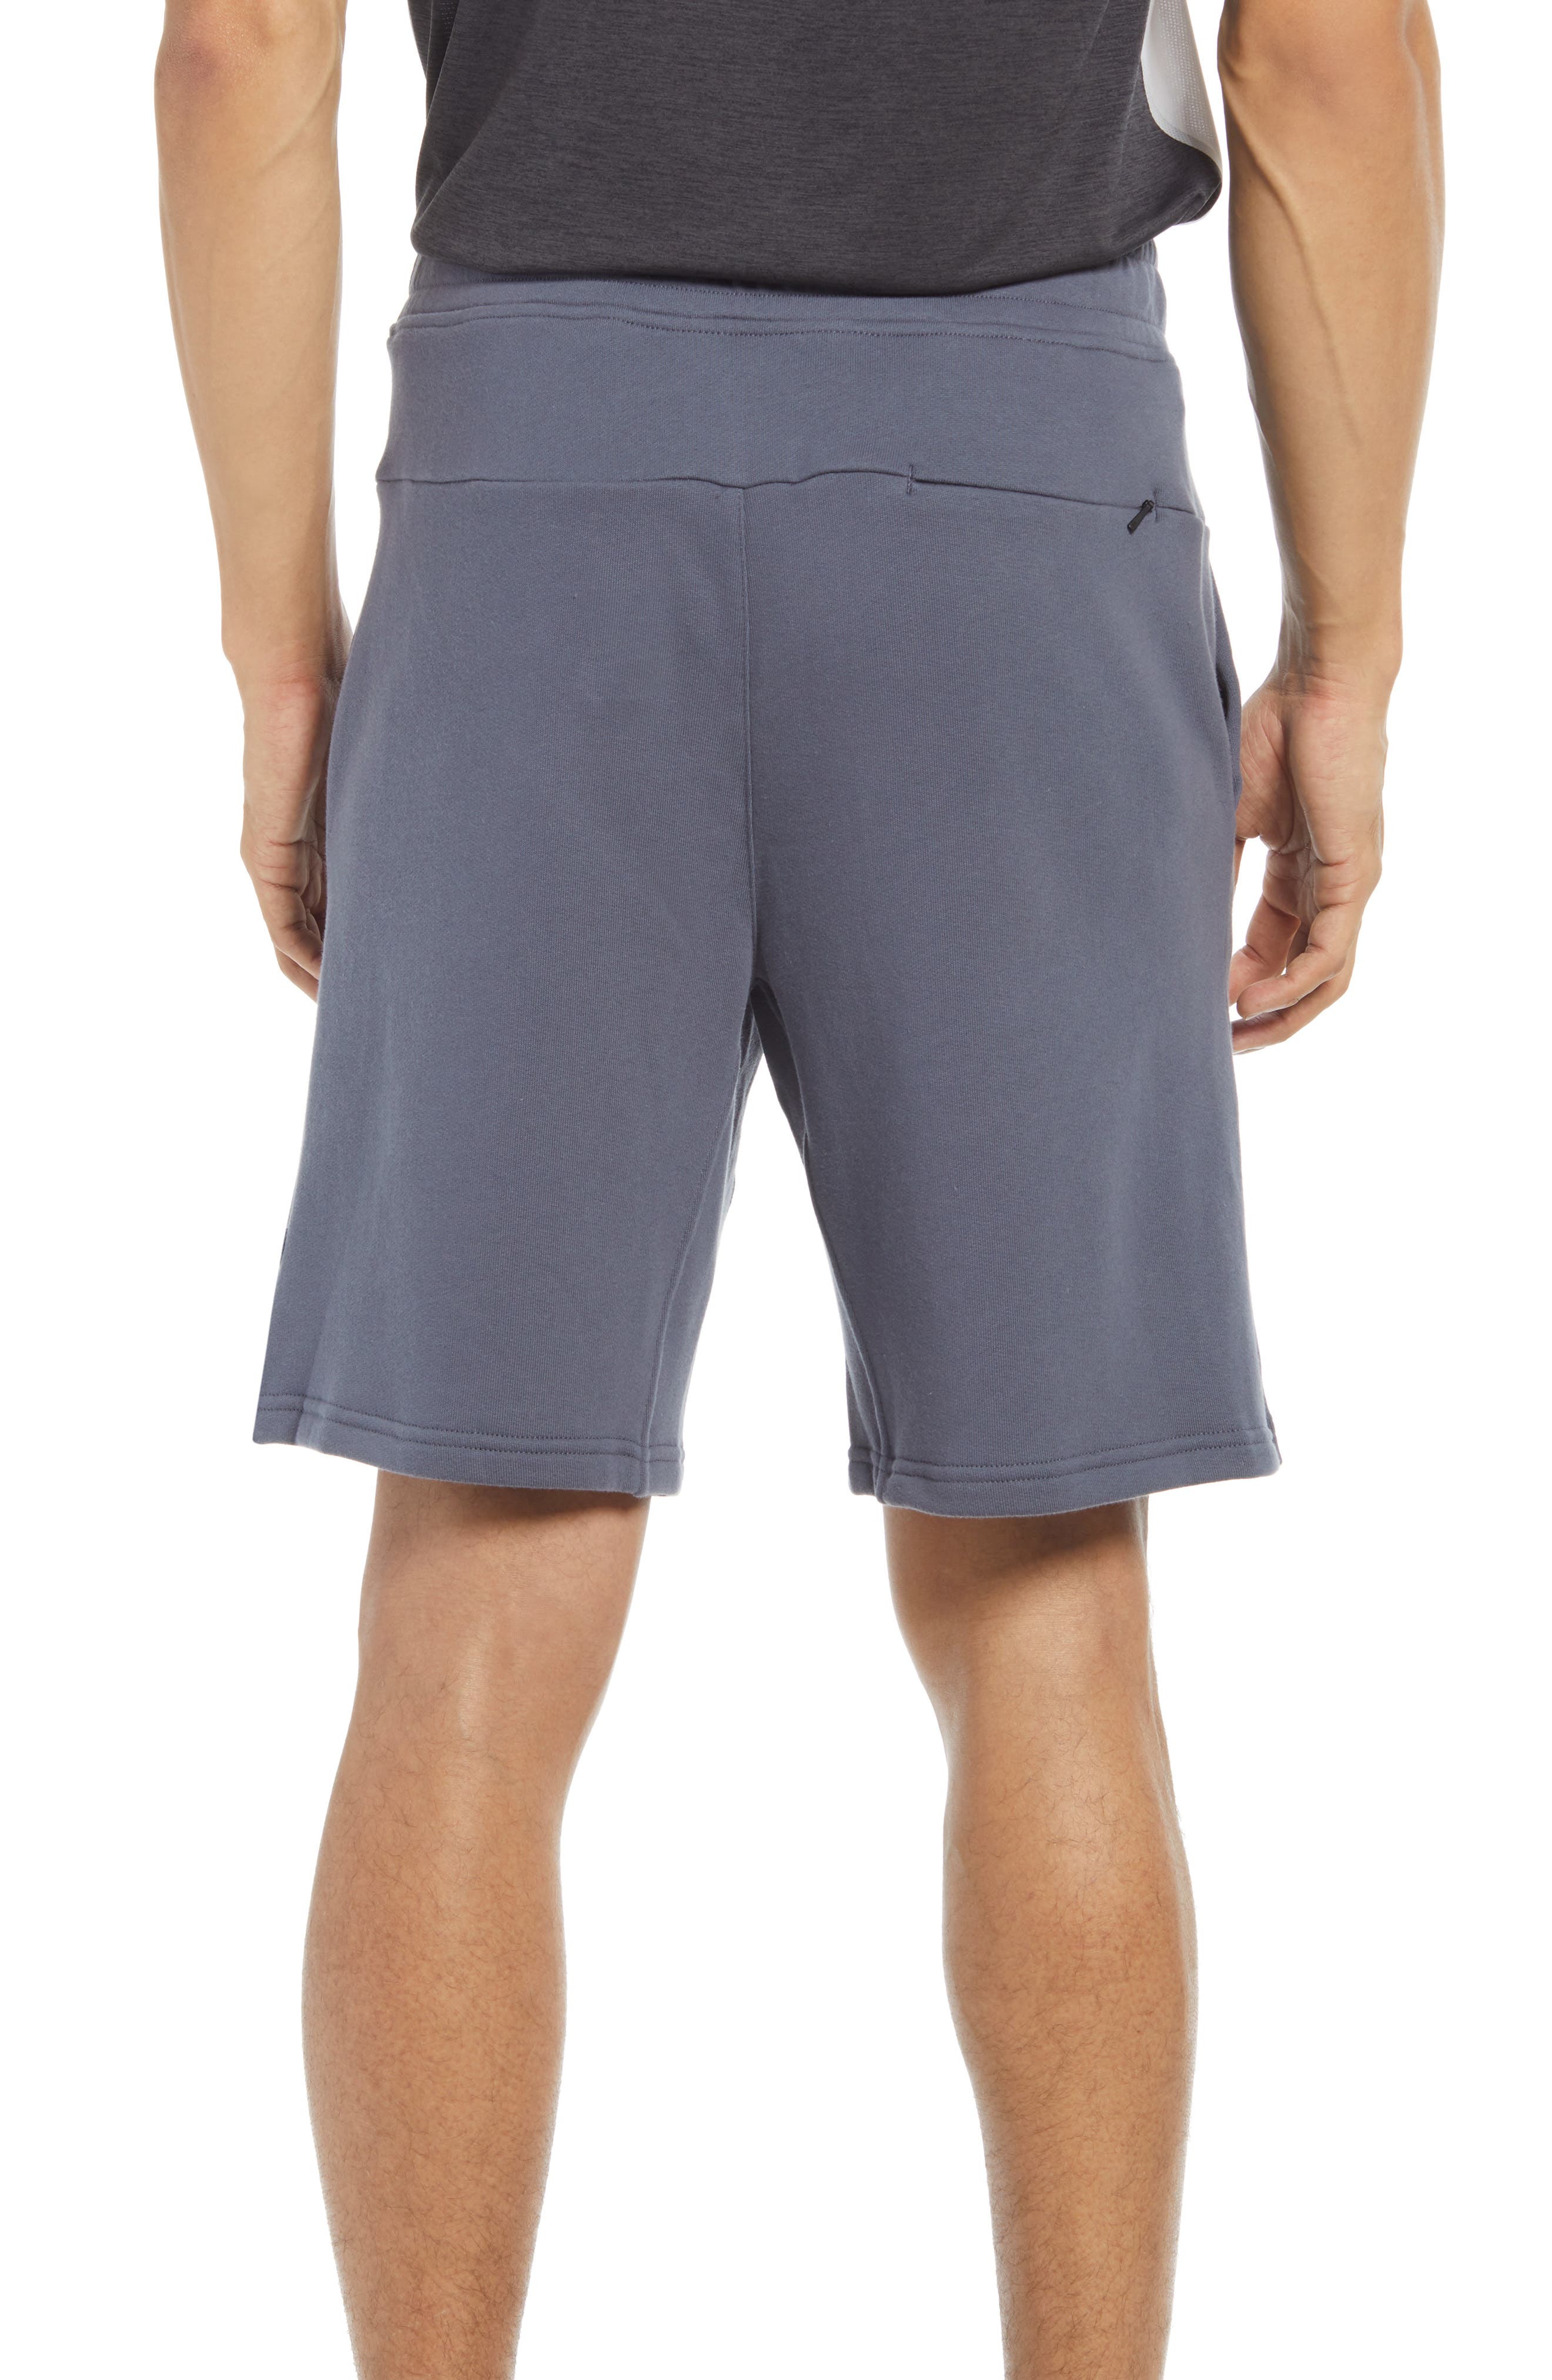 LOBBO French Terry Mens Workout Short Gym Shorts